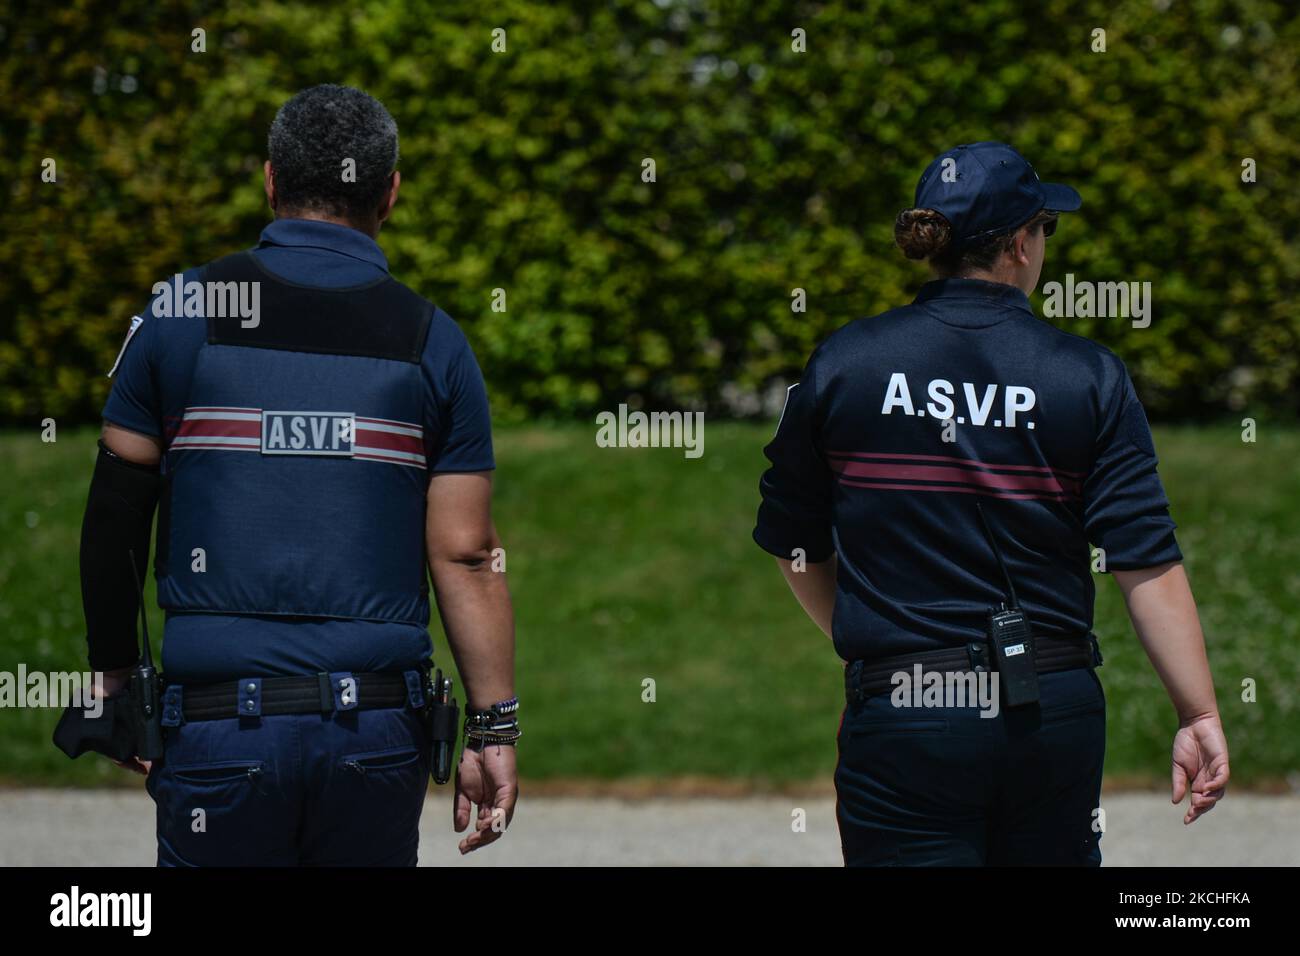 Members of the local city police patrolling in the city center of Caen with ASVP marks on their backs (A.S.V.P. - agent de surveillance de la voie publique in French). On Wednesday, July 20, 2021, in Caen, Calvados, Normandy, France. (Photo by Artur Widak/NurPhoto) Stock Photo